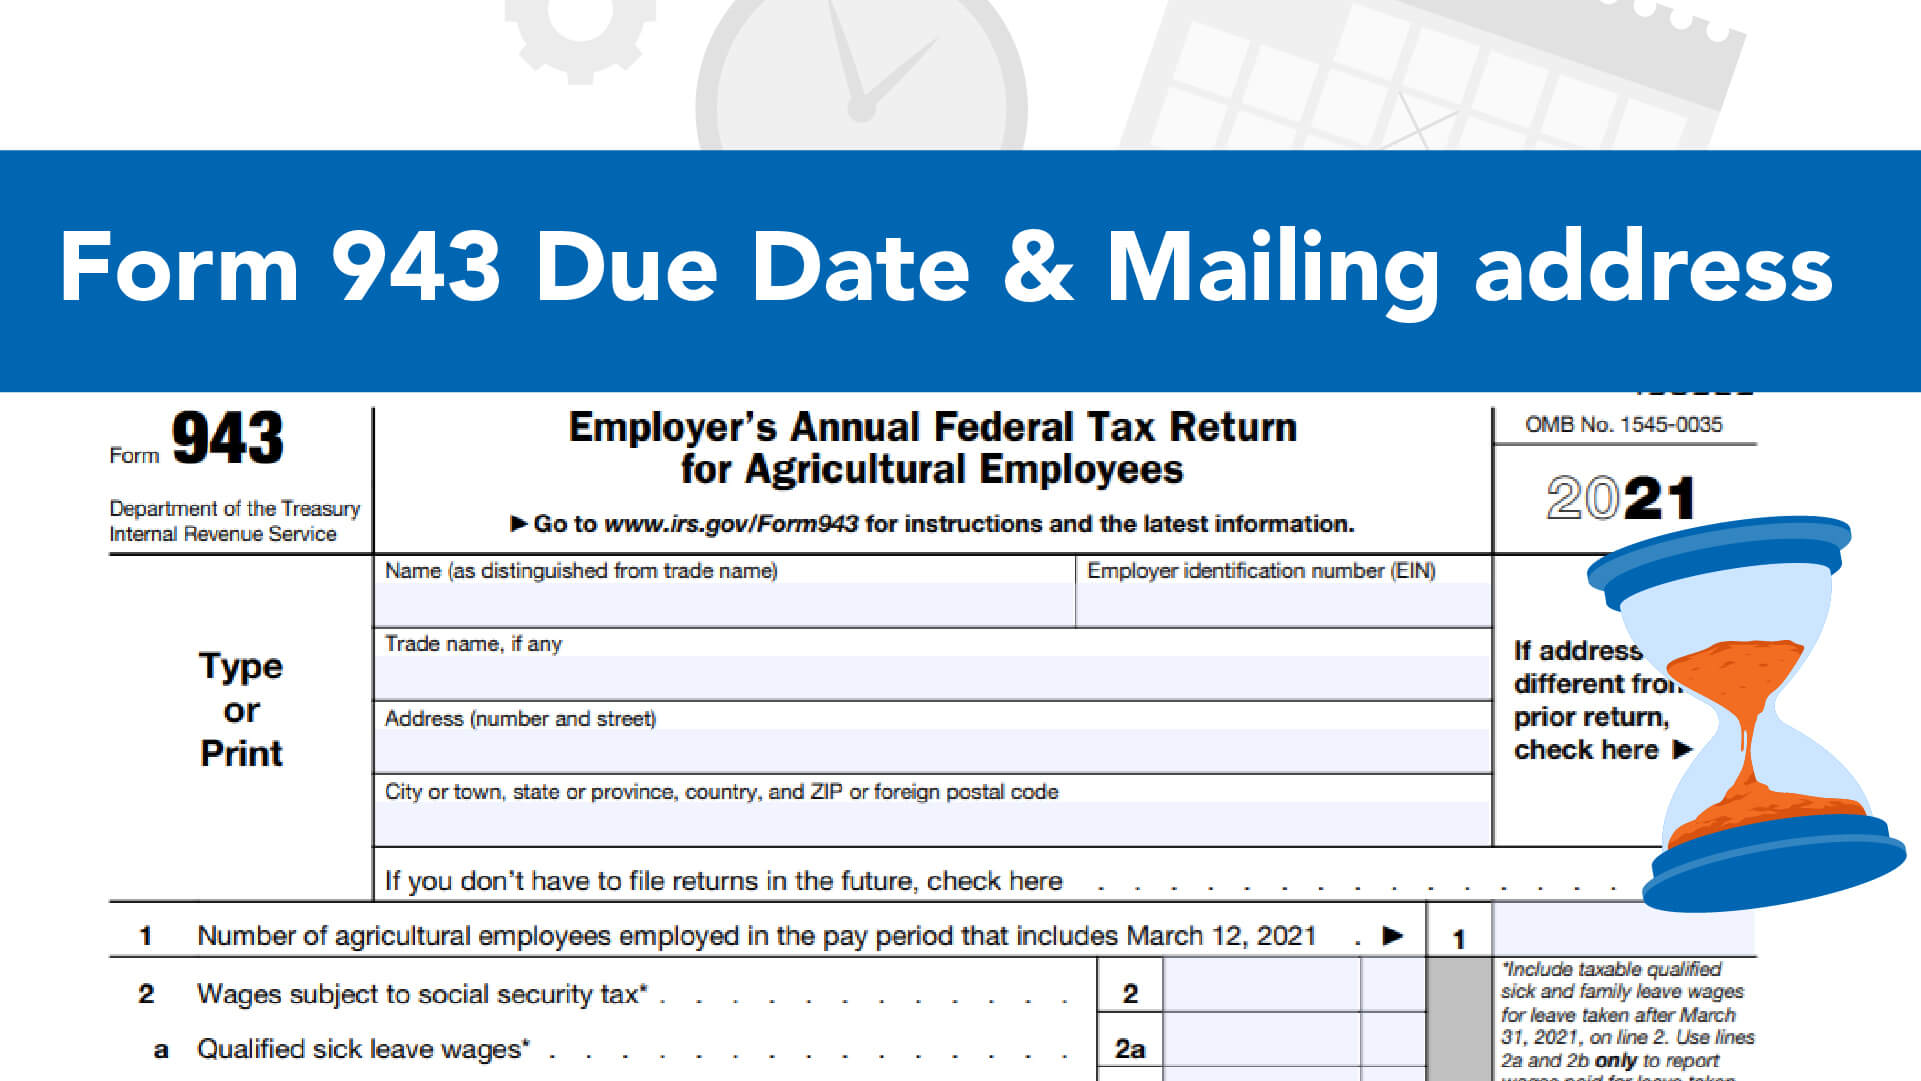 Form 943 Due Date & Mailing address